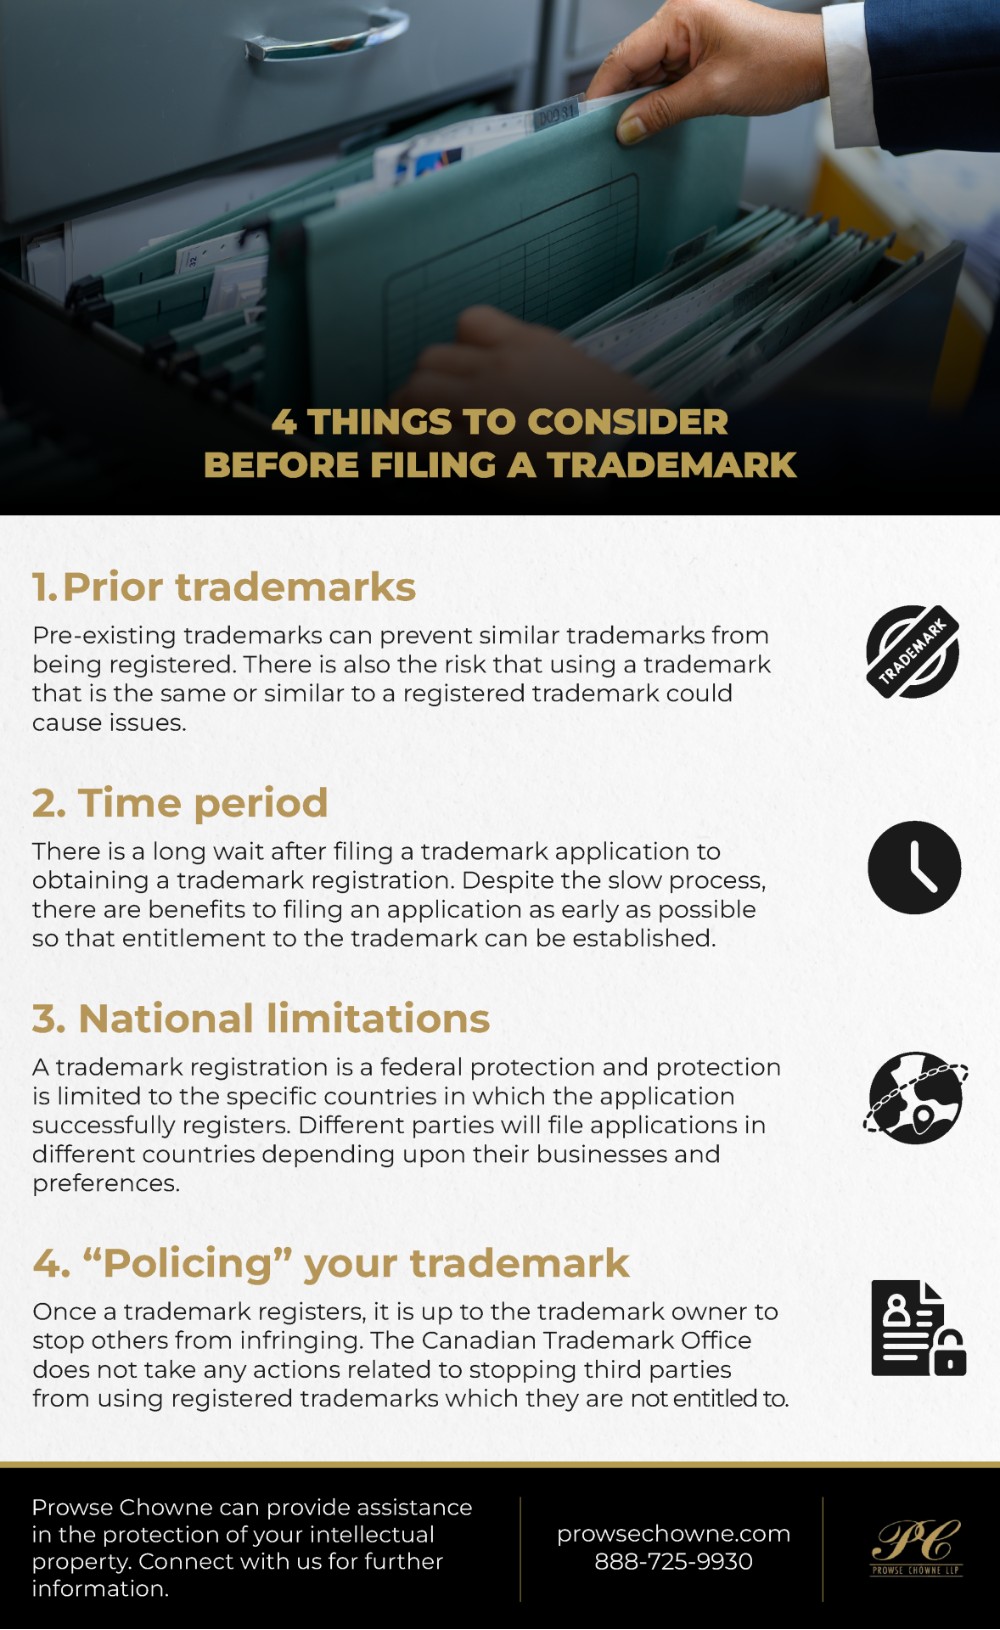 4 Things to Consider Before Filing A Trademark